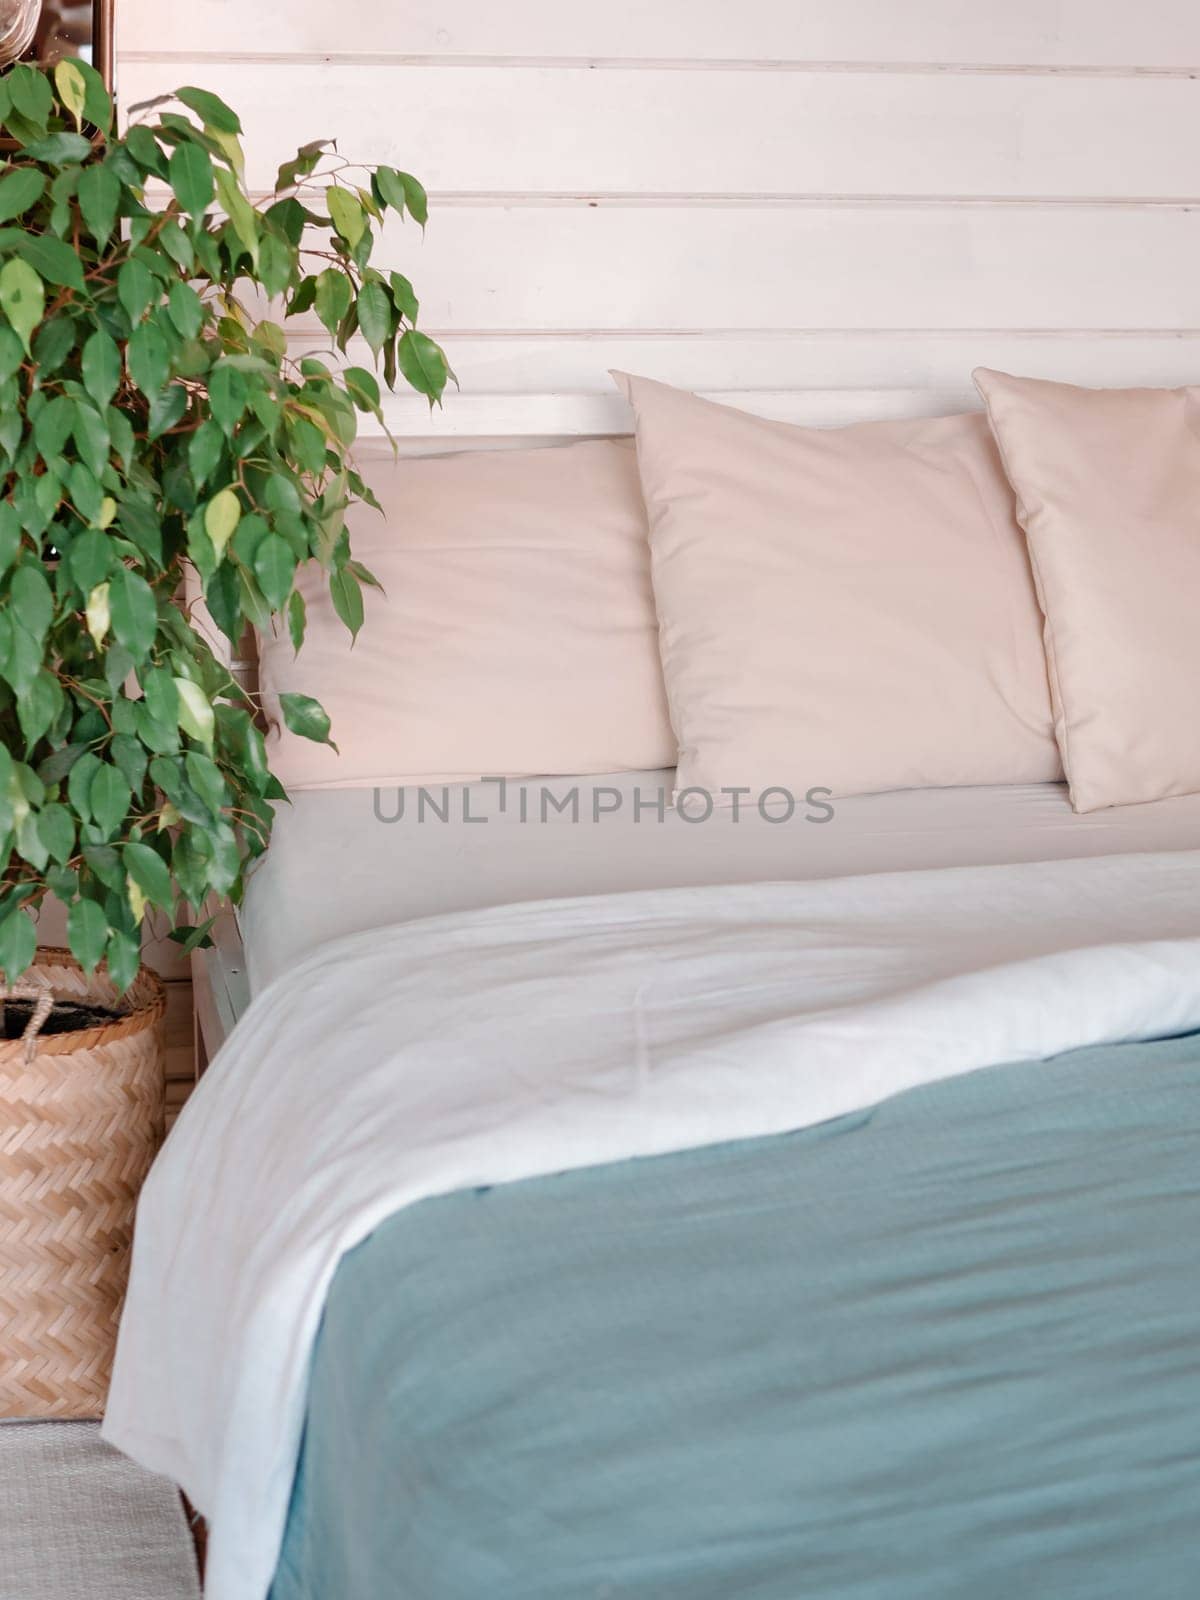 Bed in country house bedroom interior background. Green waringin tree near bed in scandinavian country house. Vertical. Copy space